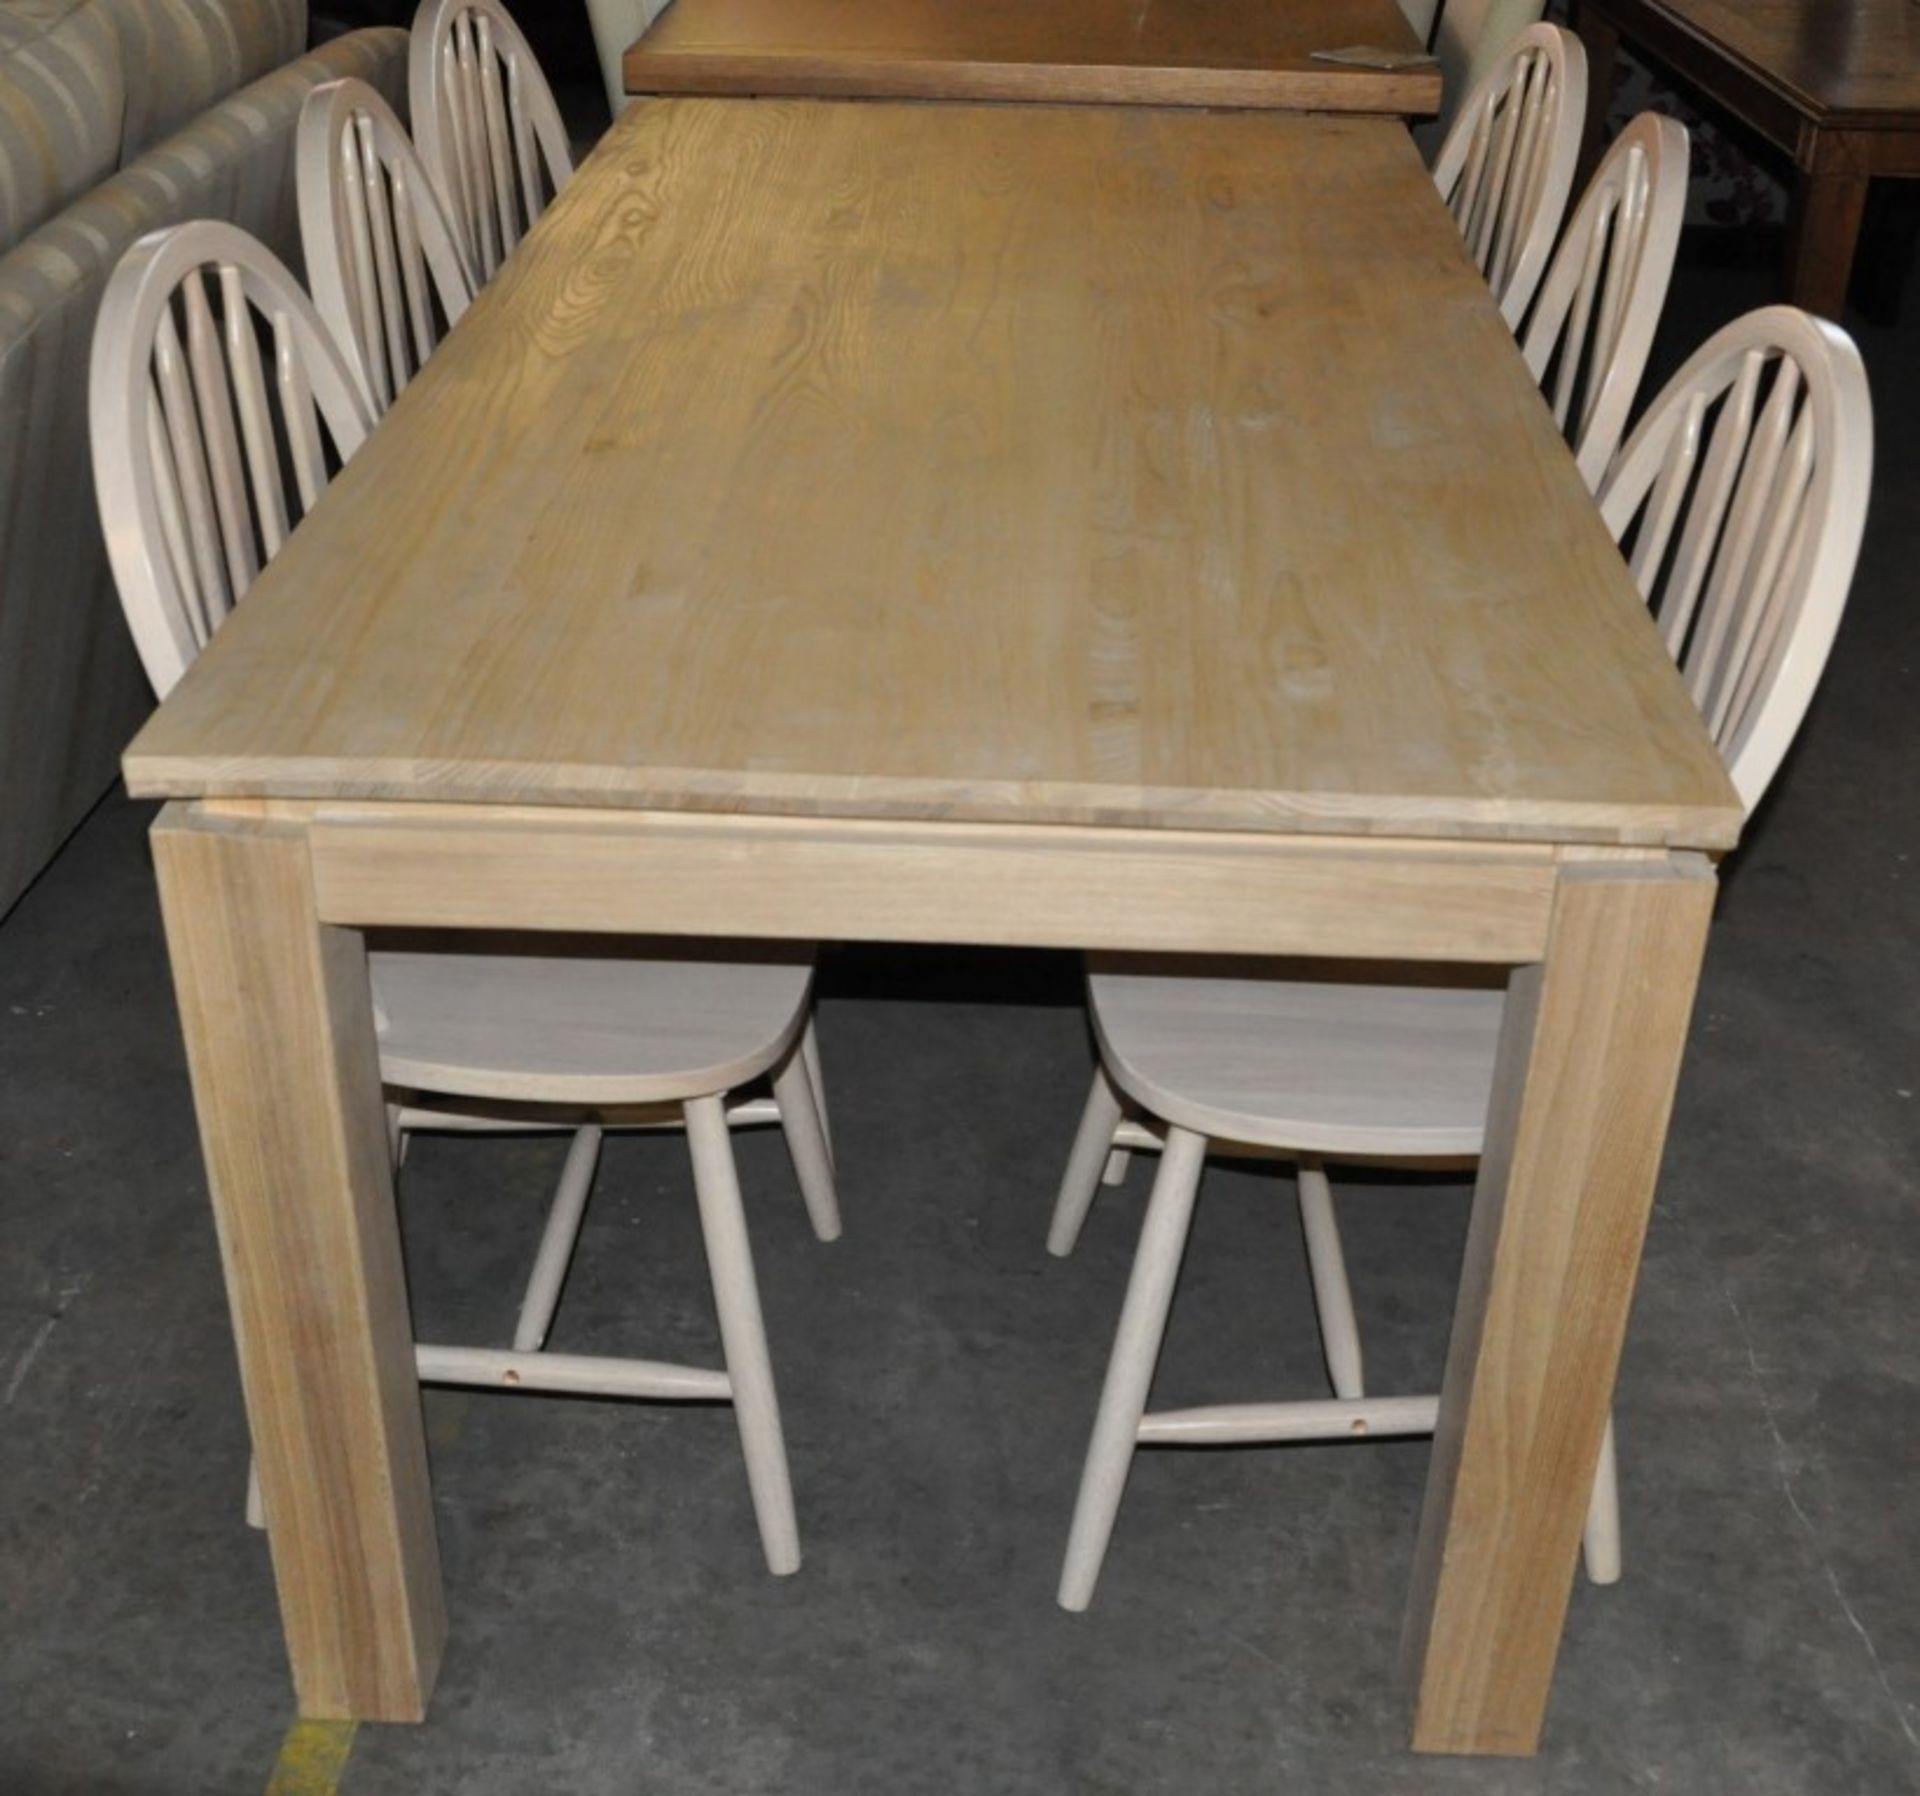 1 x Traditional Oak Wooden Table with 6 Chairs – Ex Display - Dimensions : 180x90cm – CH272 - - Image 7 of 8